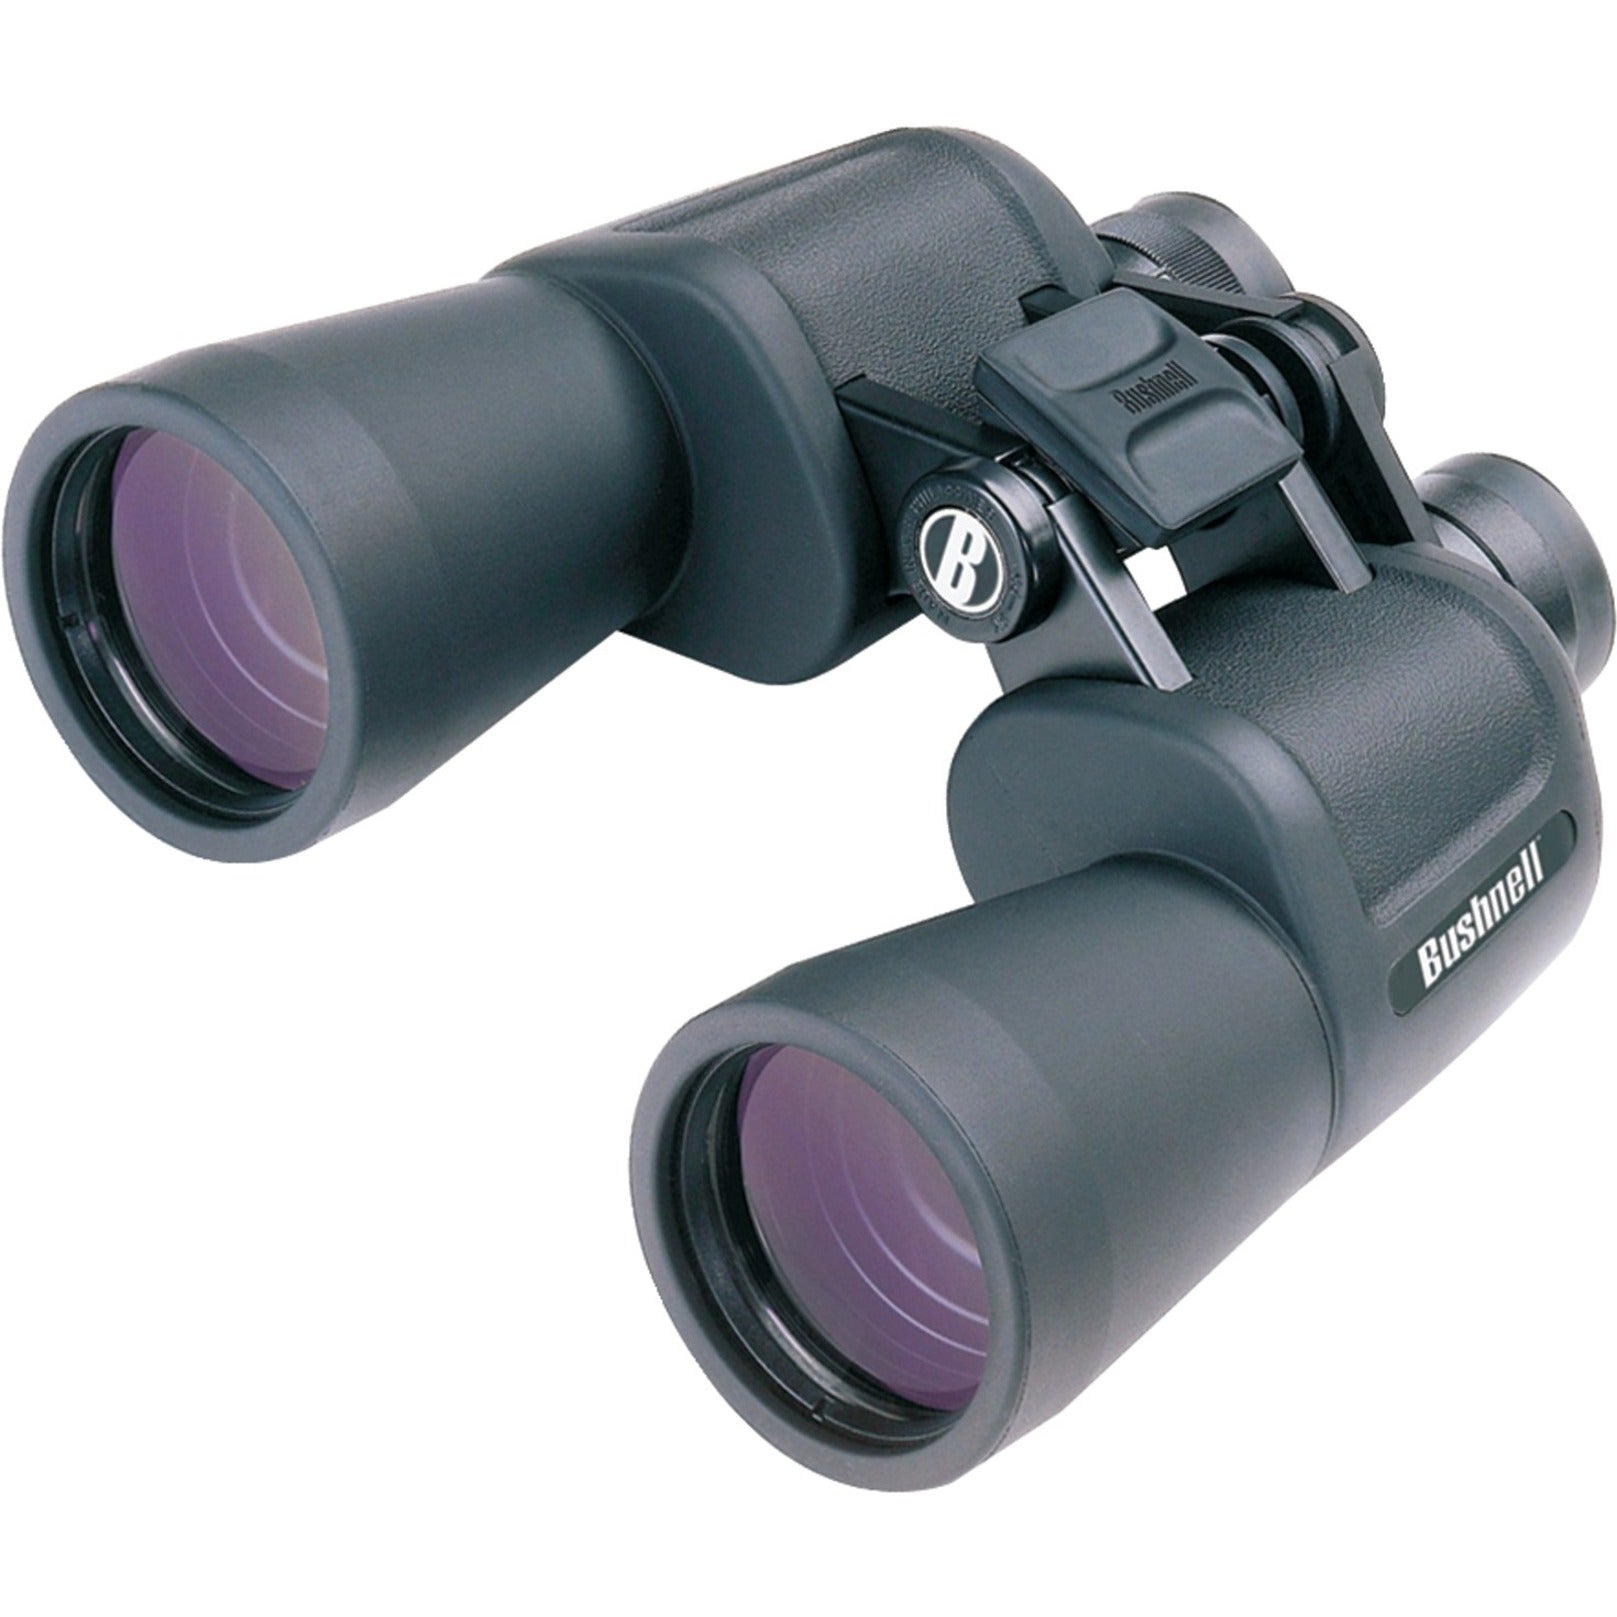 Bushnell 13-2050 Powerview 20x 50mm Binocular, Multi-coated, Armored, Ideal for Nature, Concert, and Travel